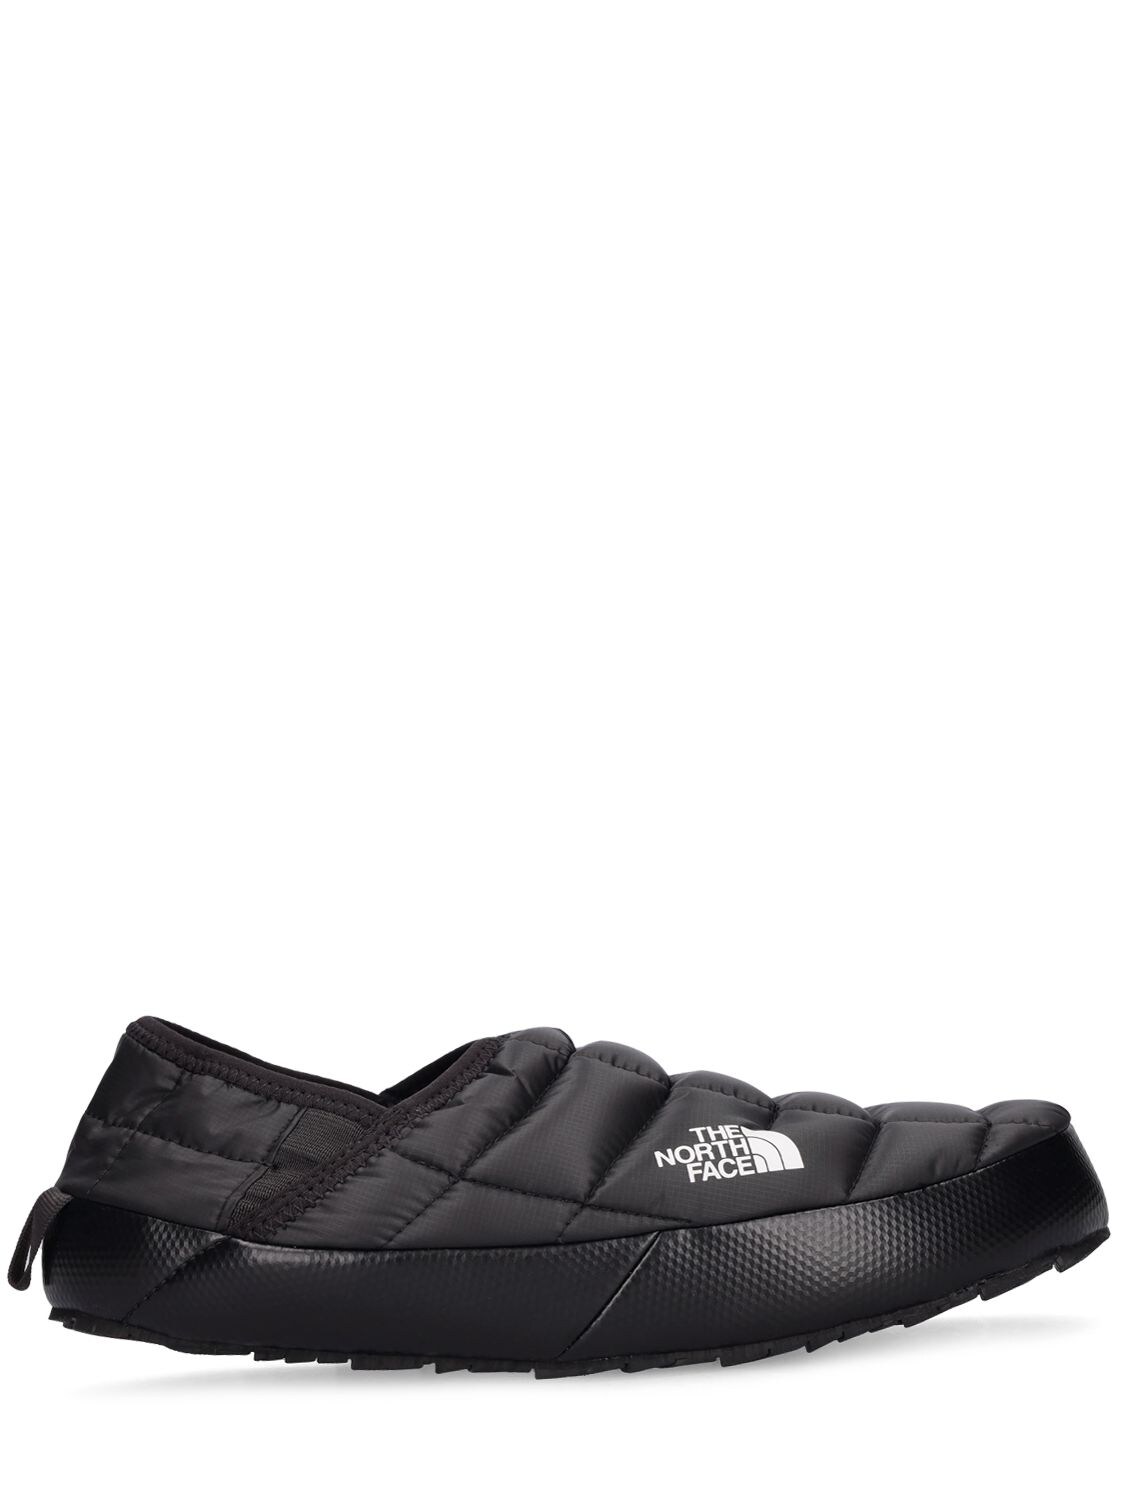 THE NORTH FACE THERMOBALL NUPTSE MULE